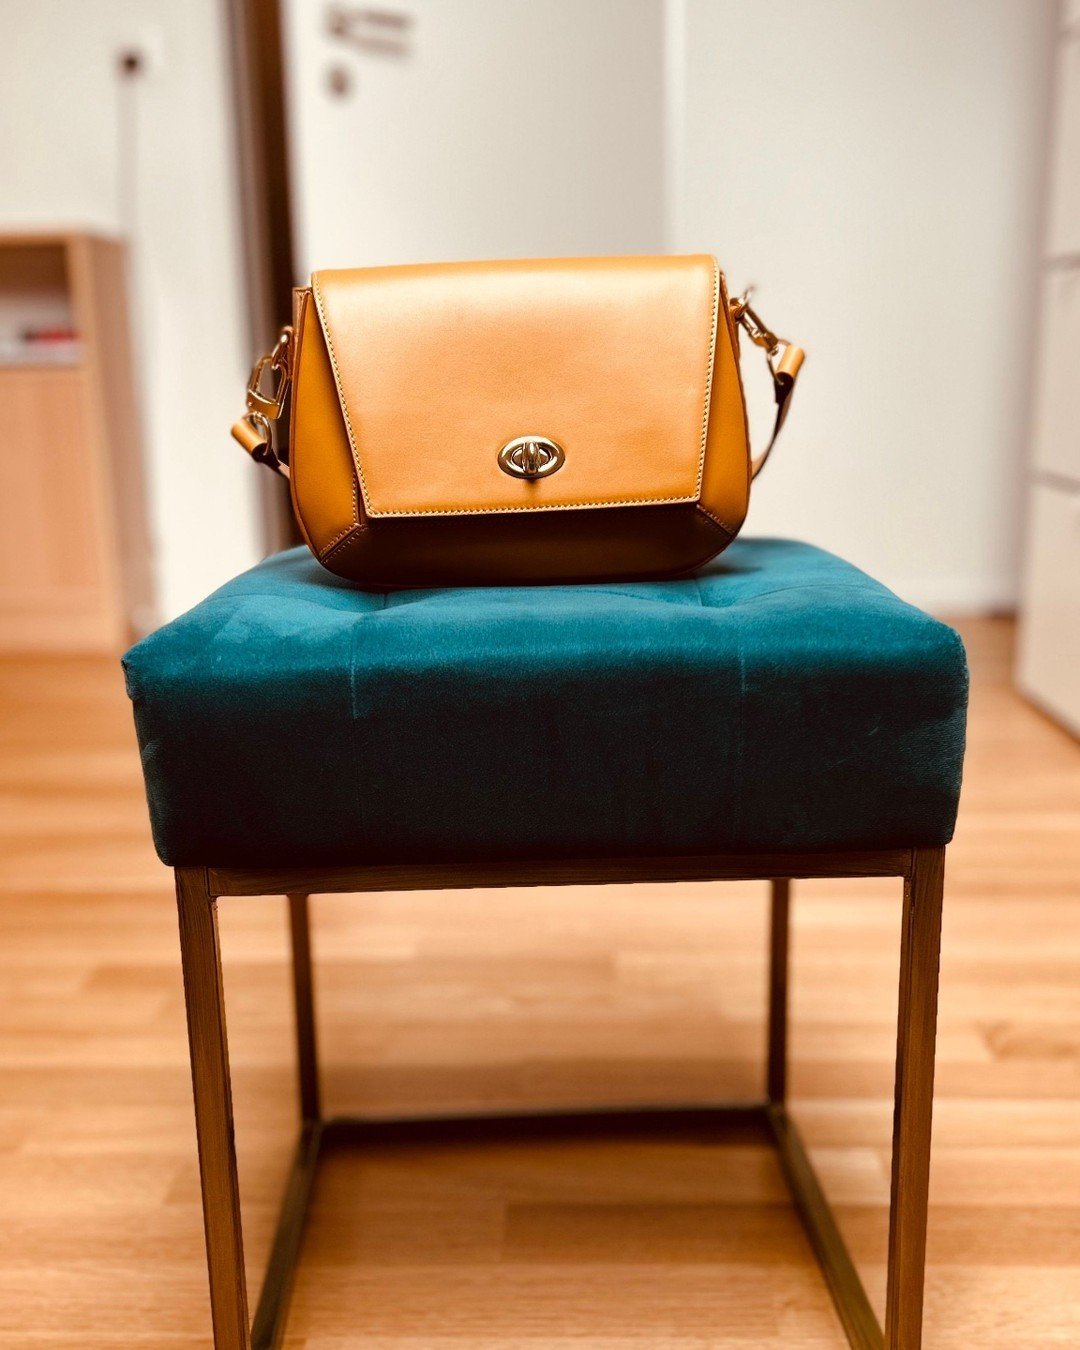 Admiring our Aja handbag 😍

Now that we're seeing it on this gorgeous green stool, maybe it could go with an emerald green outfit. 

Thoughts?

#aja #kaeinthe #handbag #leather #closet #handbag #outfit #ootd #purse #highfashion